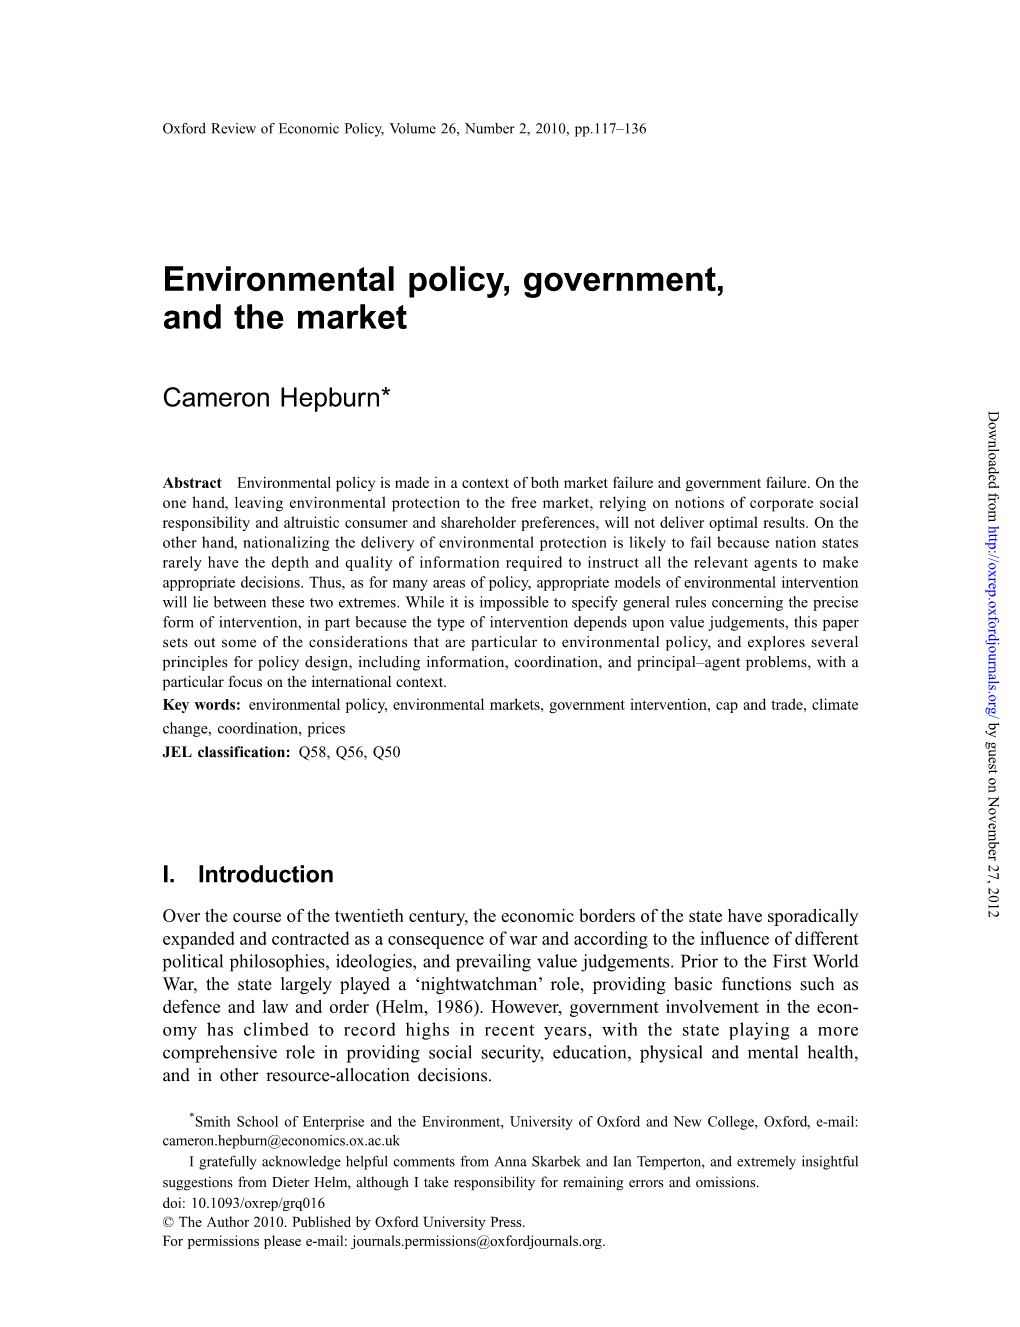 Environmental Policy, Government, and the Market